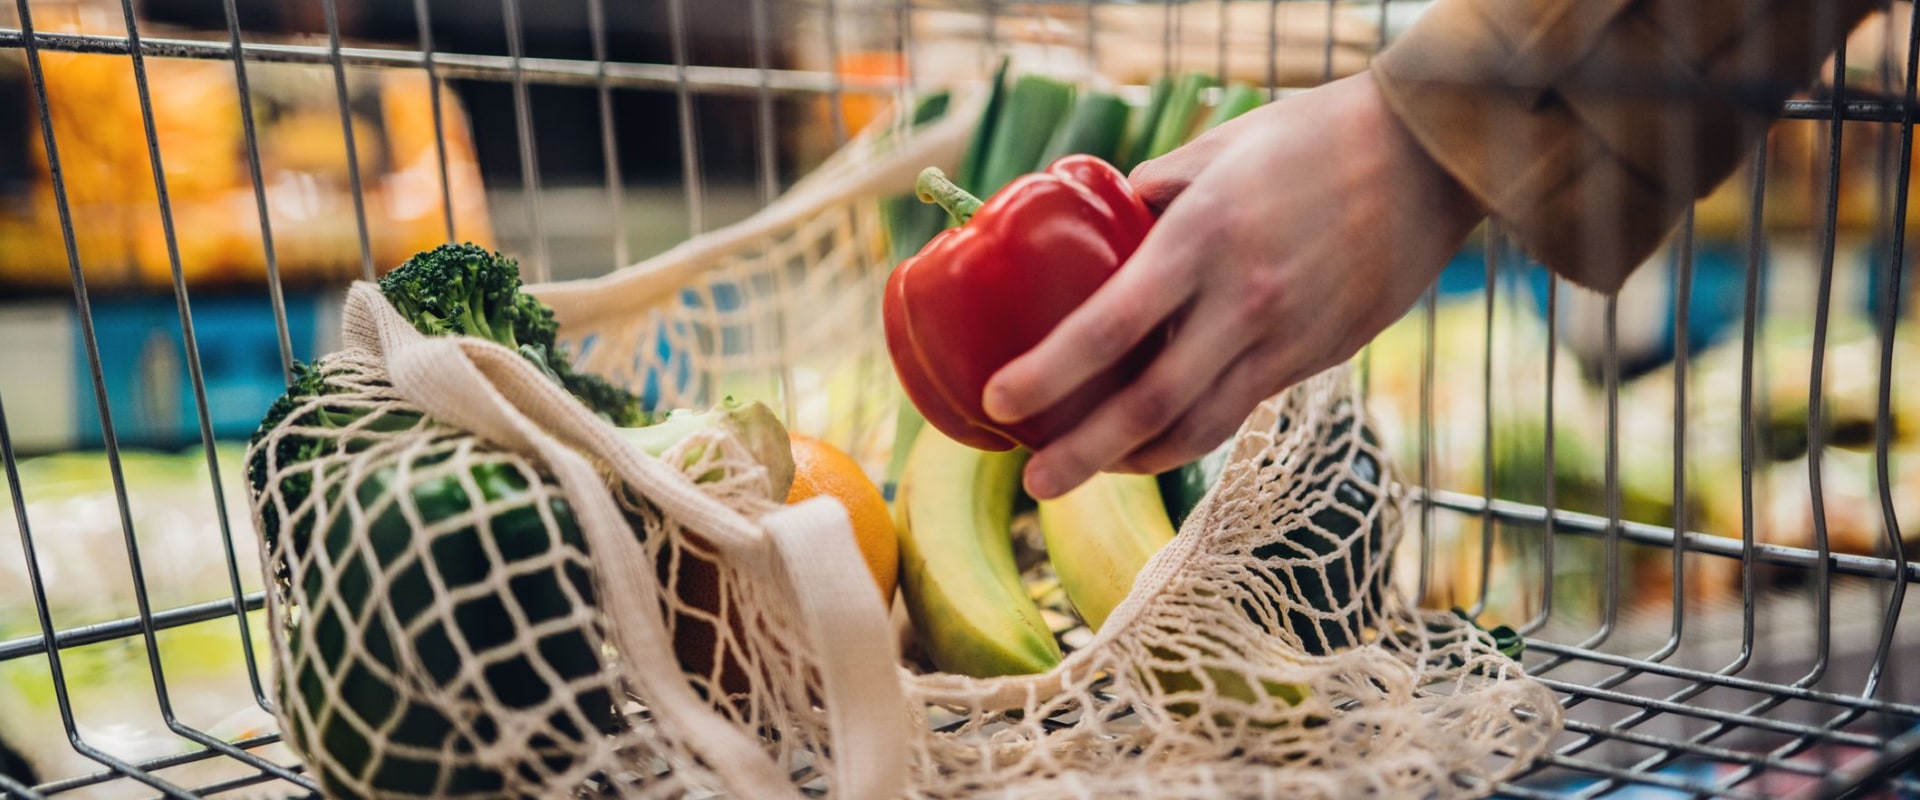 Creating a Healthy Shopping List: How to Make Sure Your Grocery List Fits Your Nutritional Goals